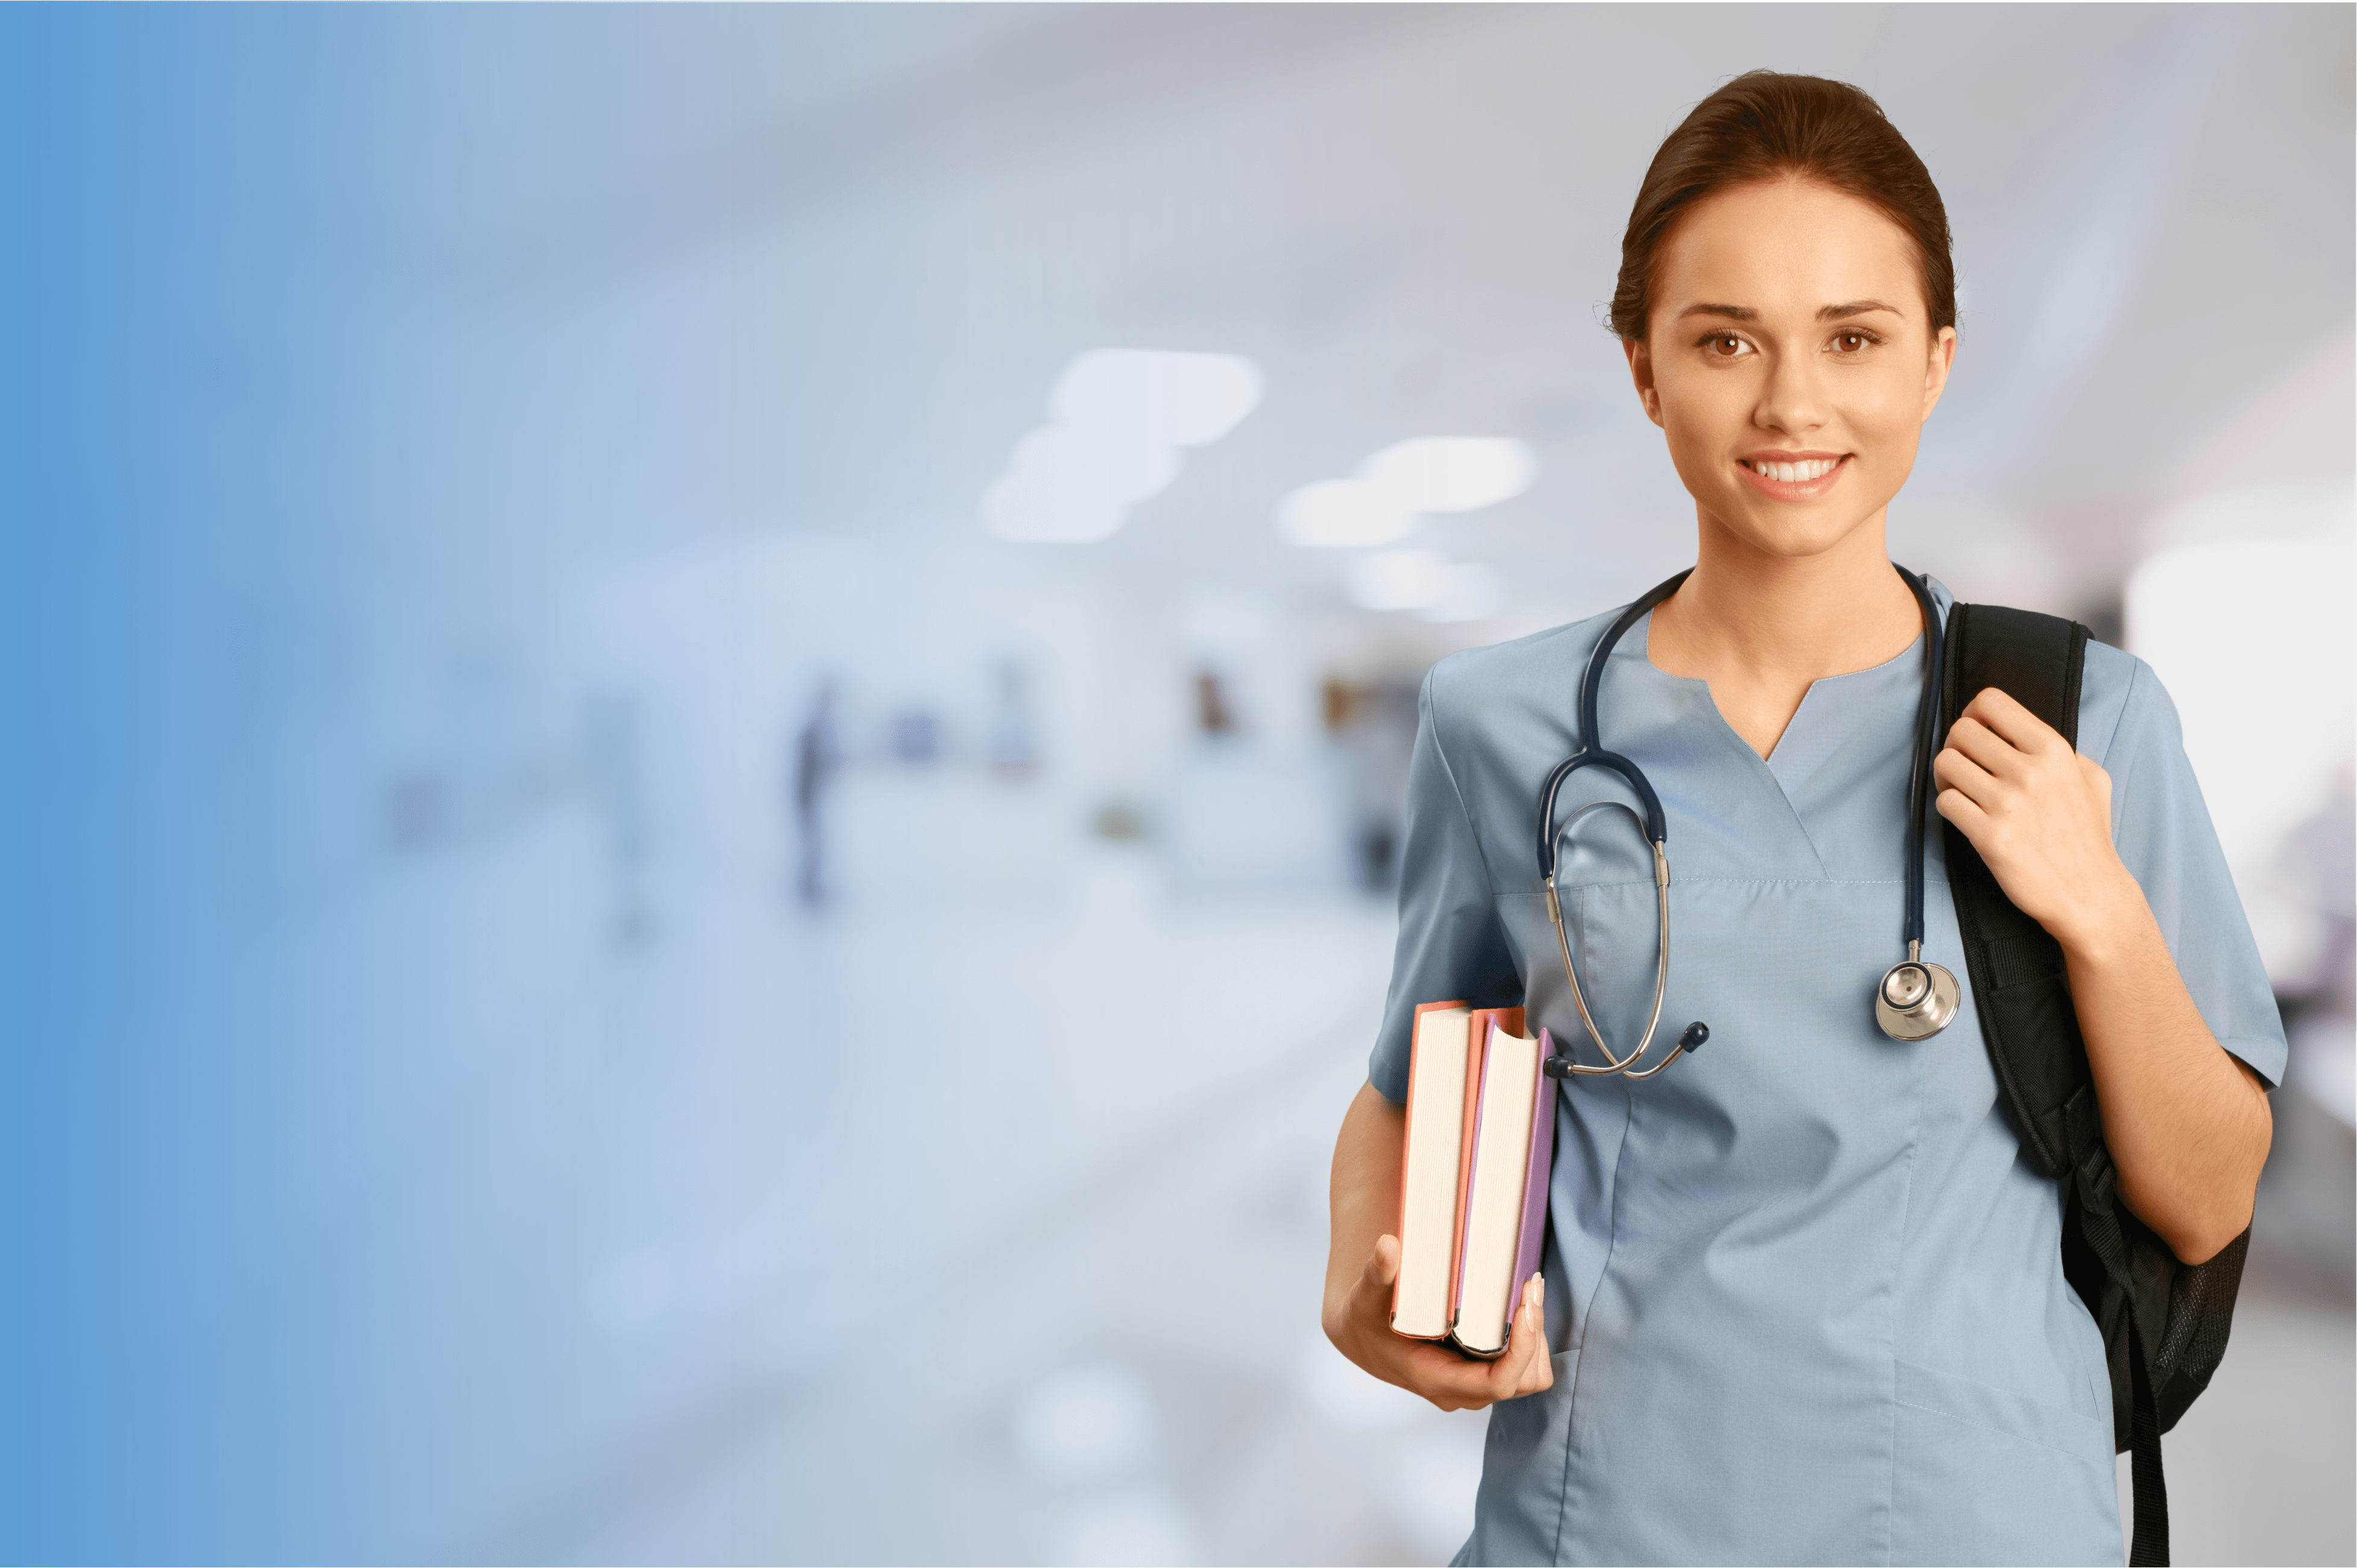 Provided good resources to study from – NCLEX RN Exam Prep Course – Fenwick Ontario